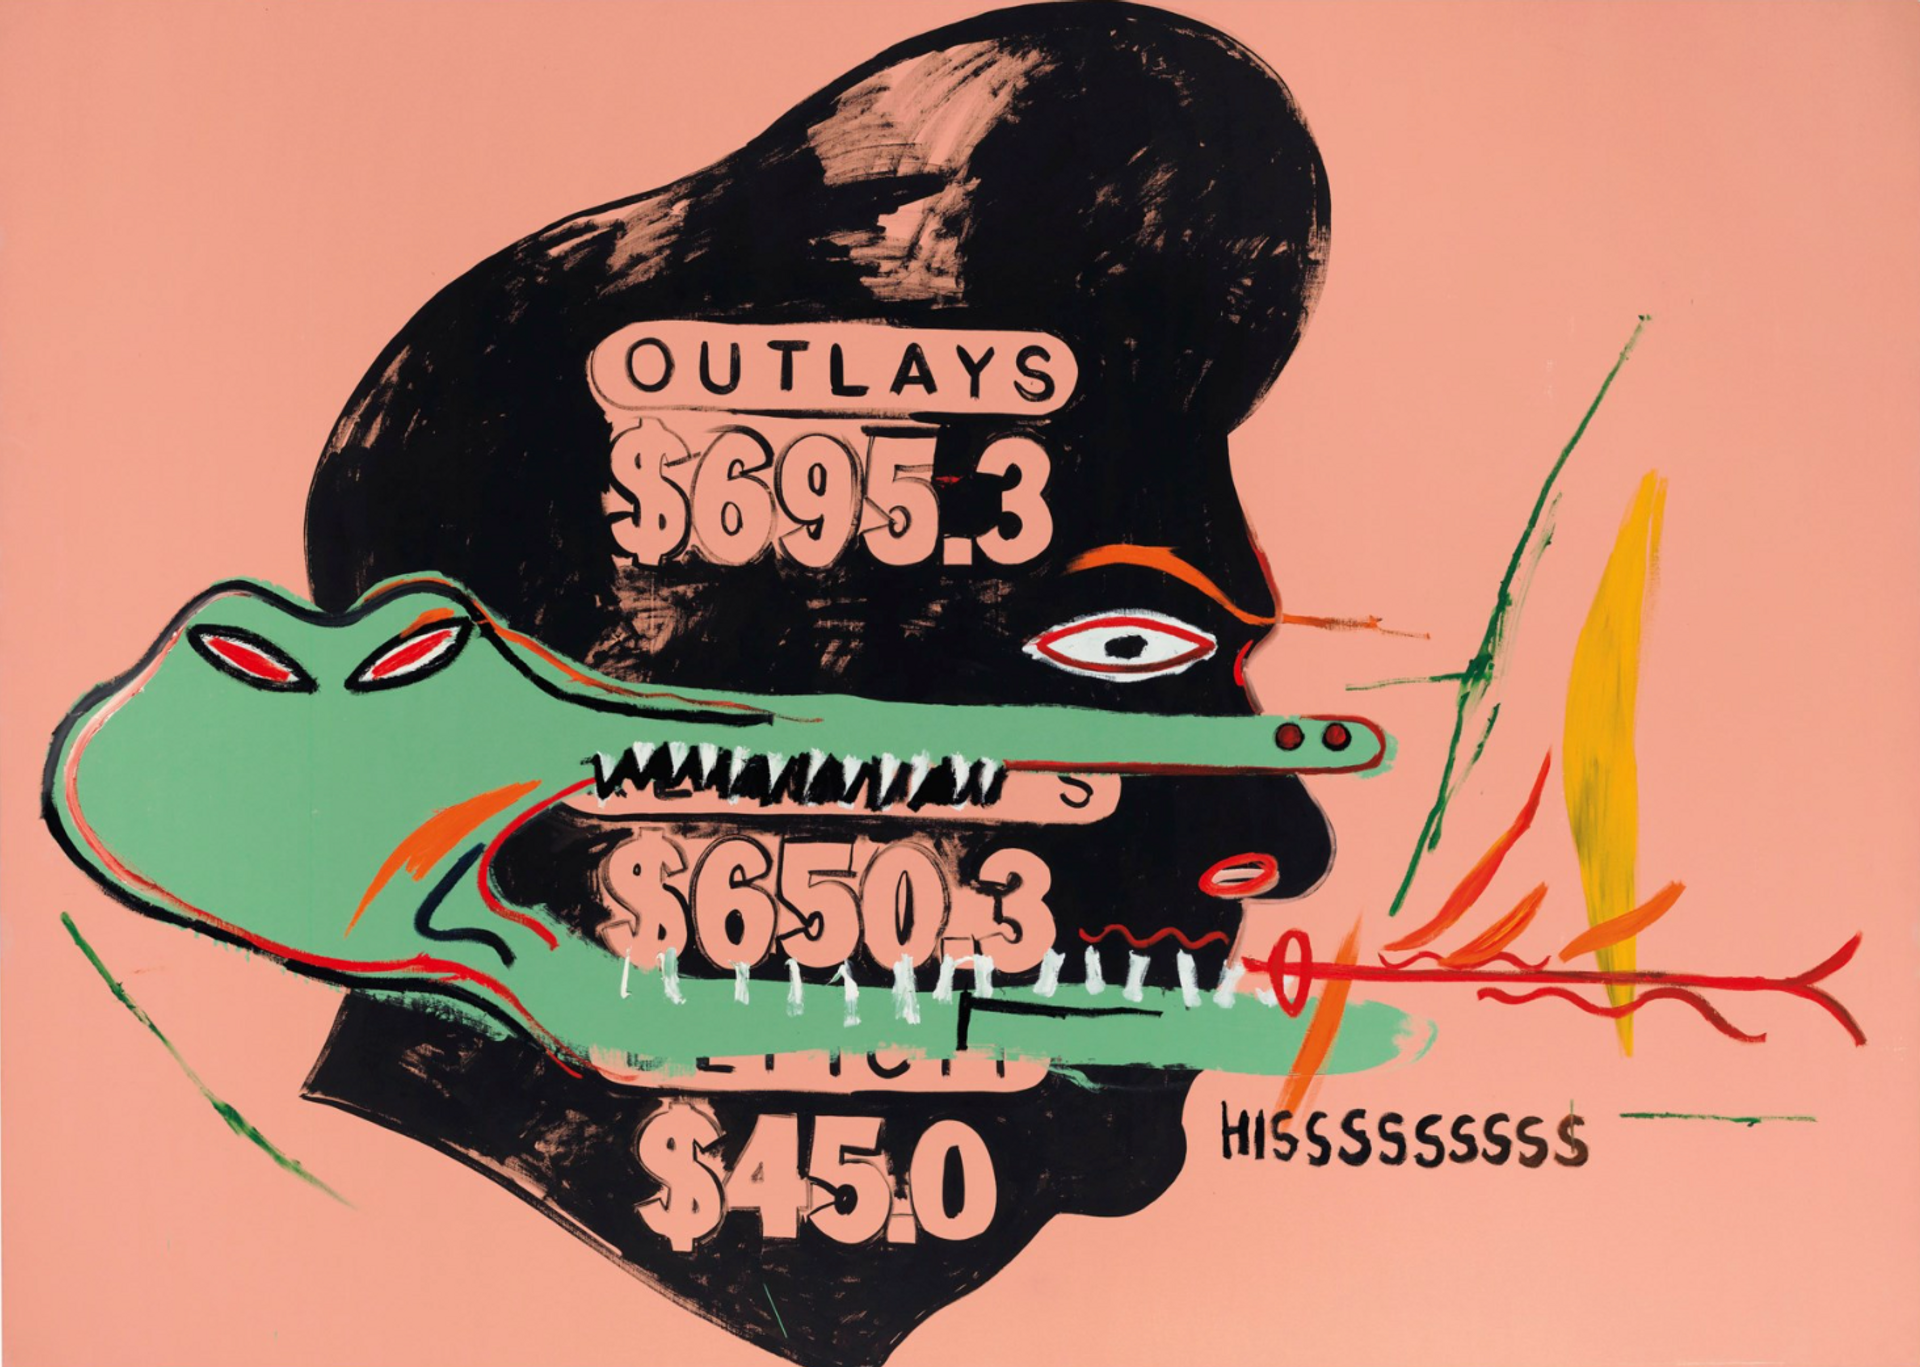 Outlays Hisssssssss (Collaboration #22) by Andy Warhol and Jean-Michel Basquiat - MyArtBroker